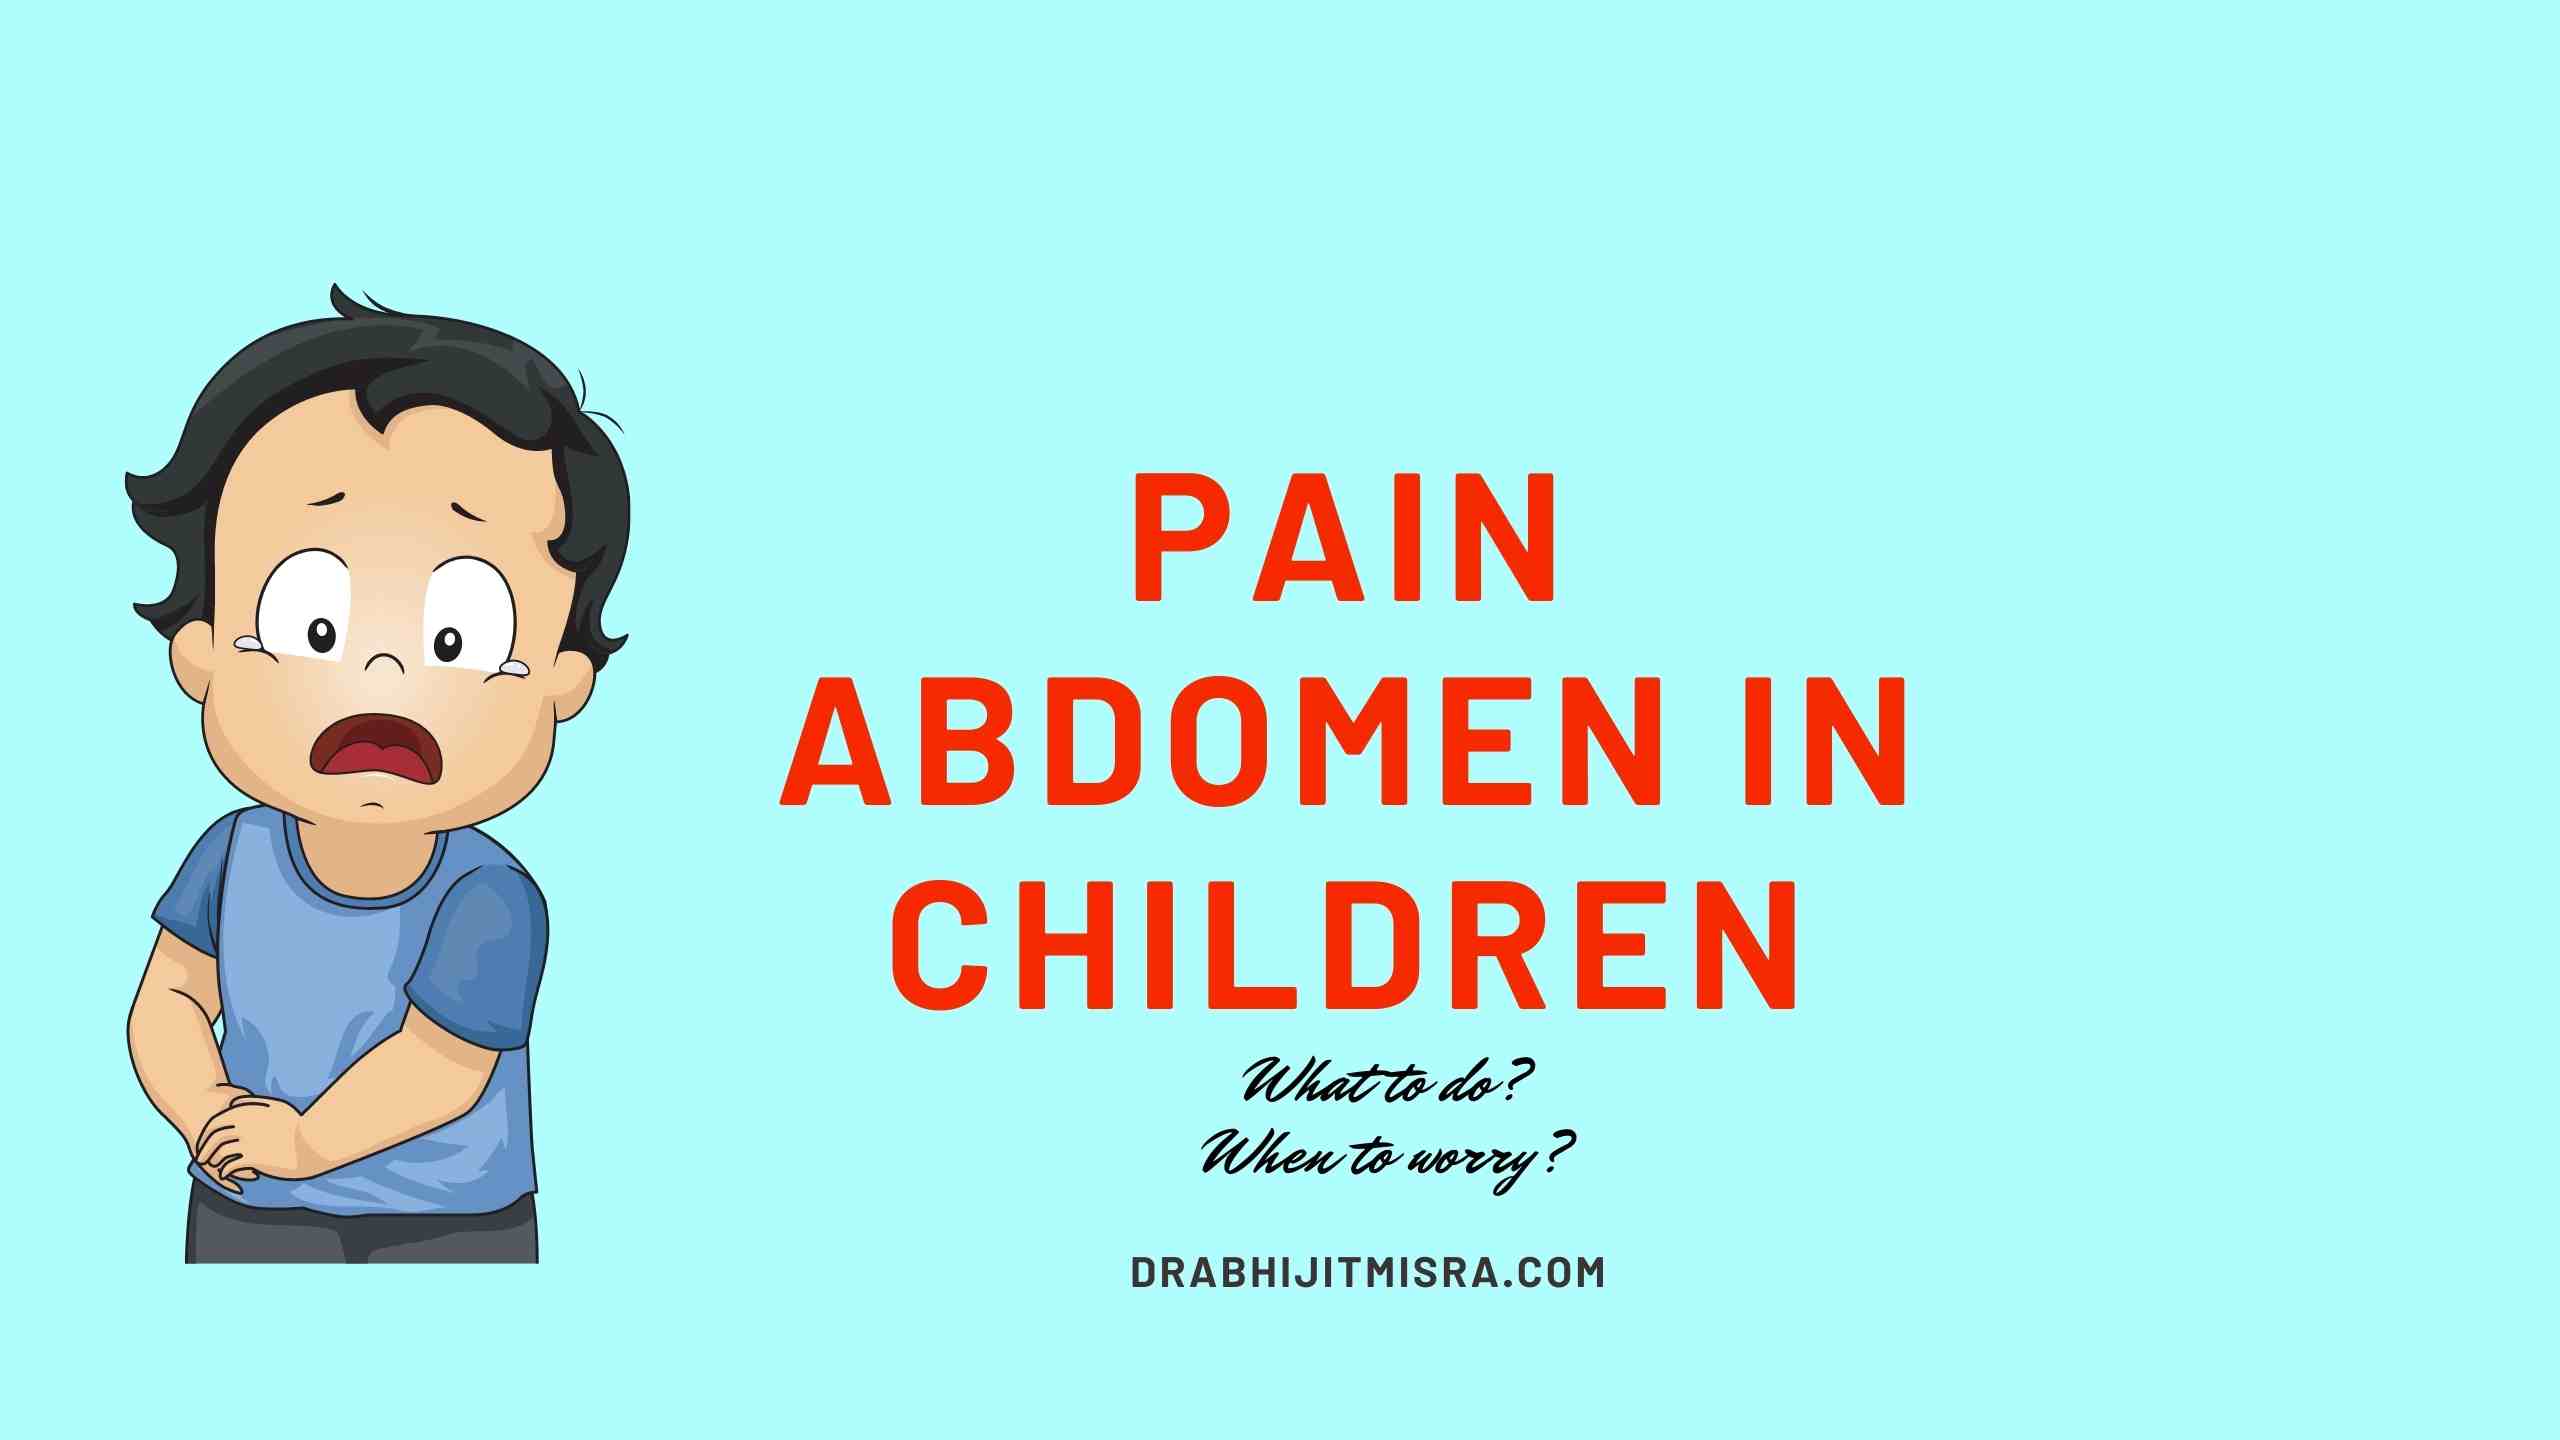 Pain abdomen in children: What to do and when to worry?